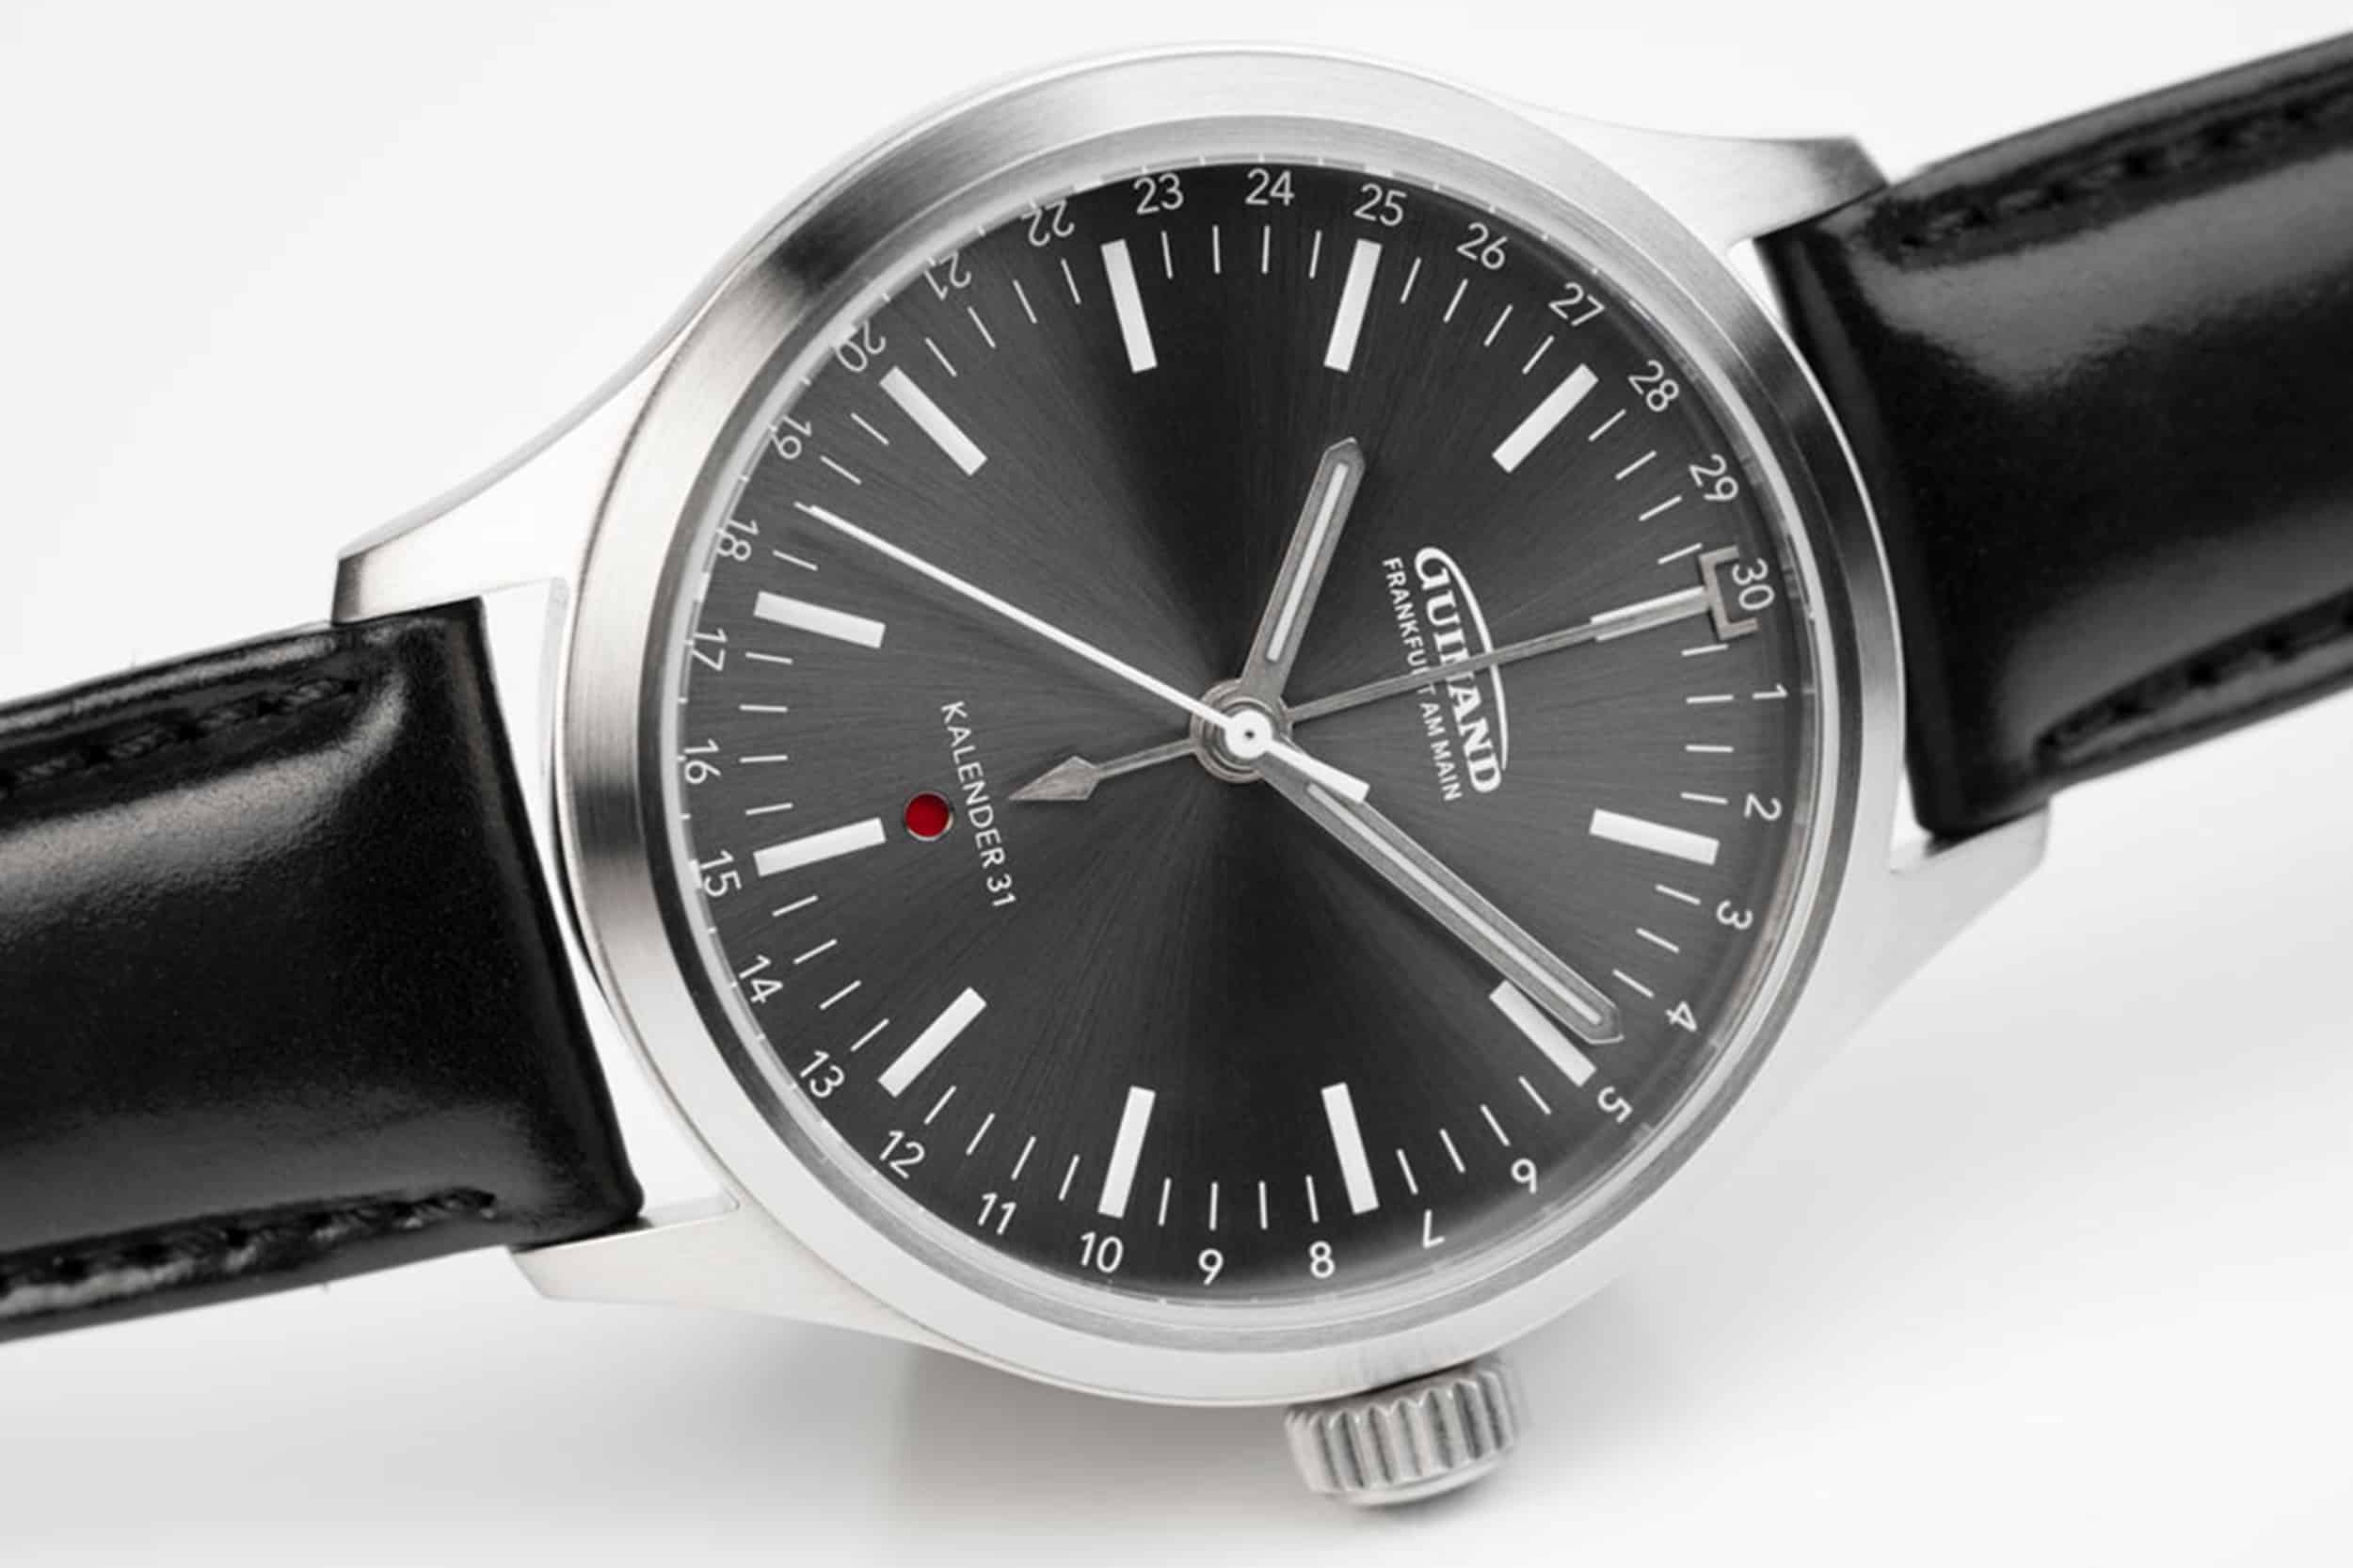 Guinand Introduces the Kalender 31, a New Watch With a Genuinely Different Take on the Pointer Date